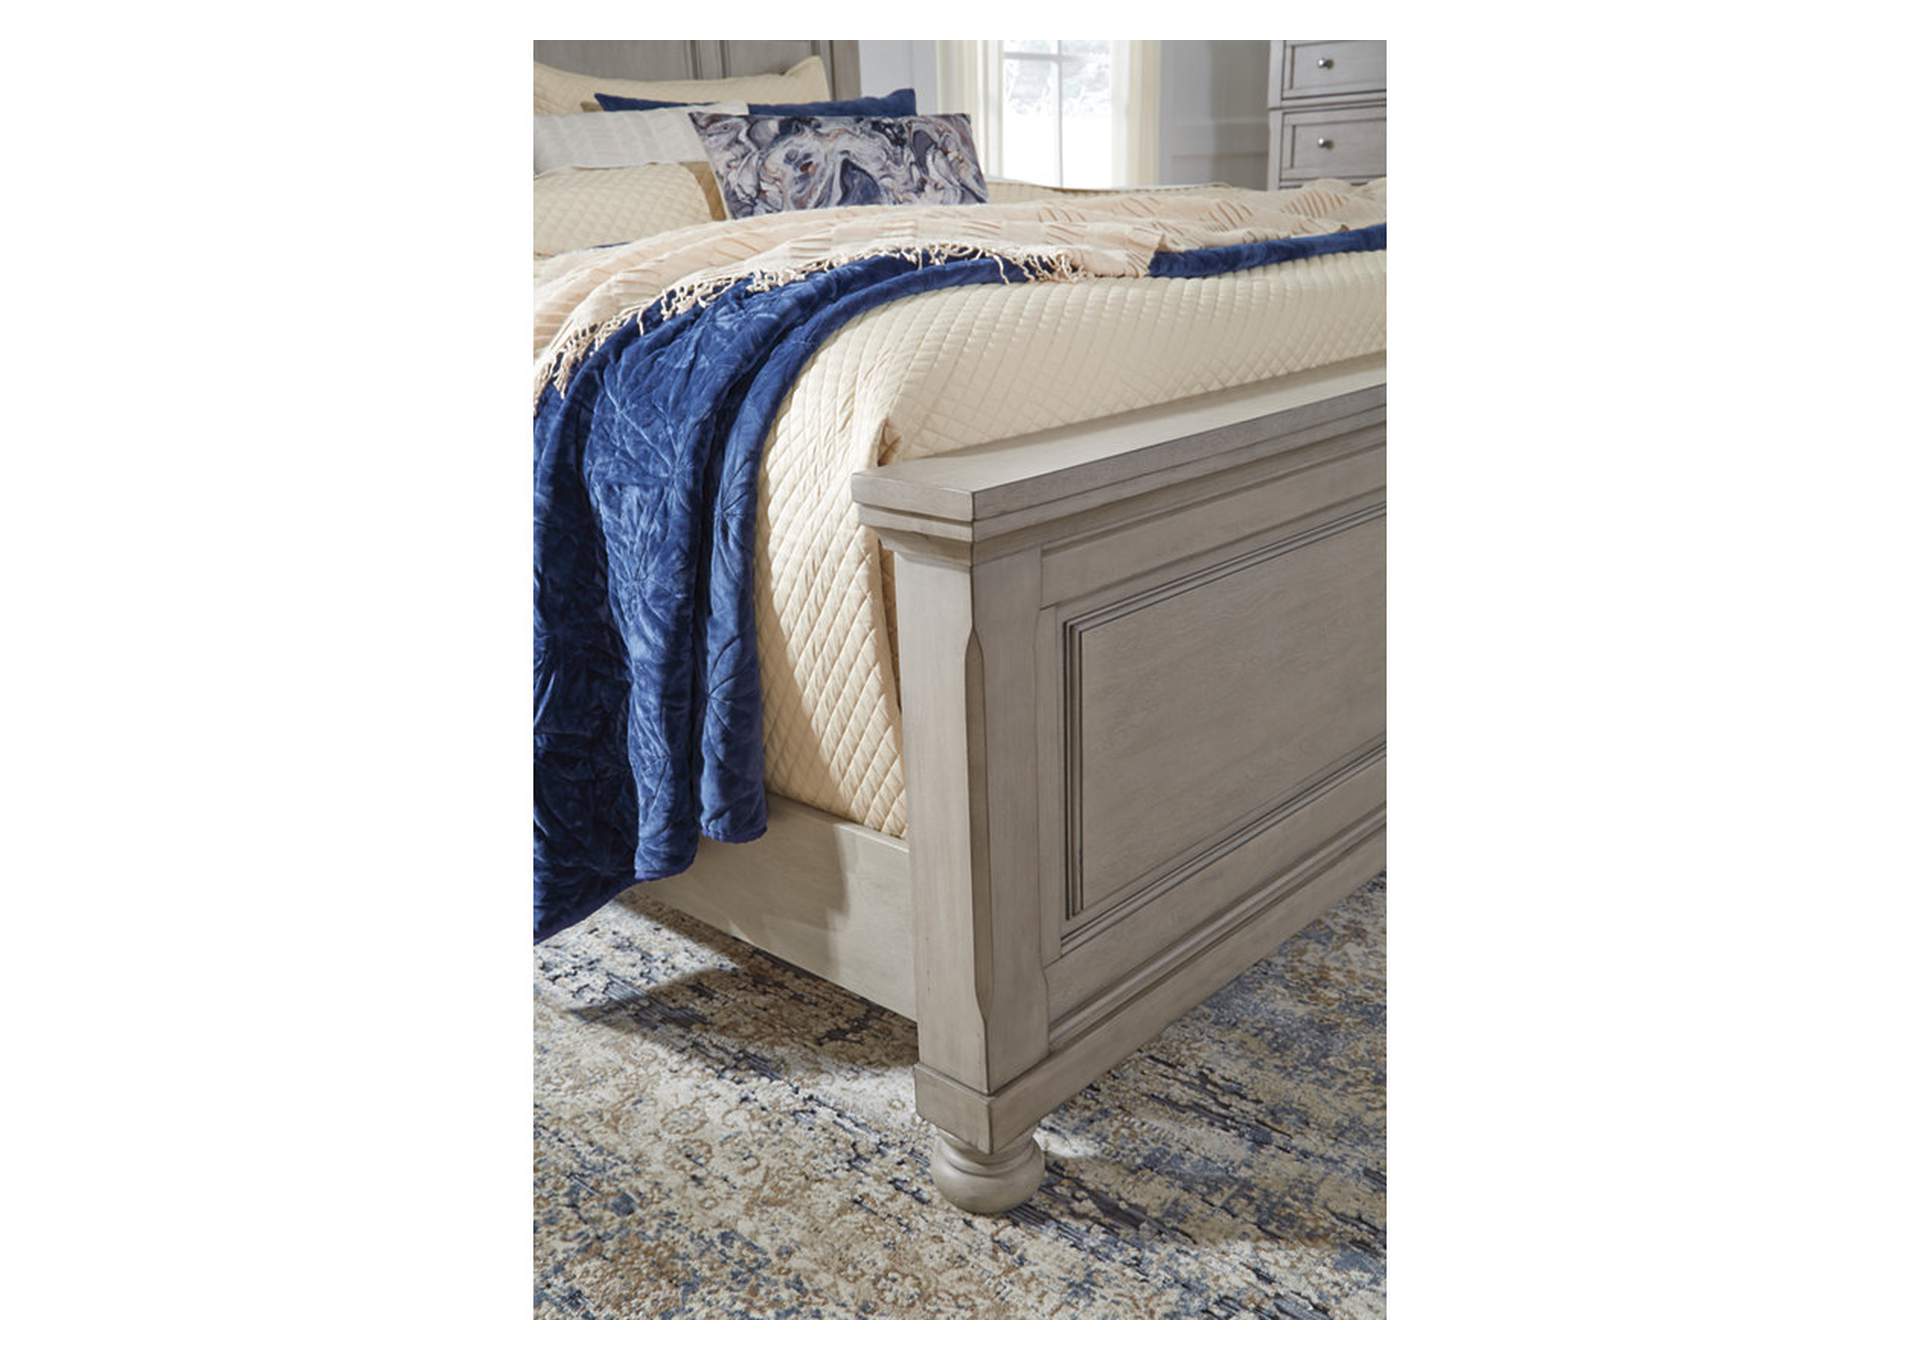 Lettner California King Panel Bed,Signature Design By Ashley